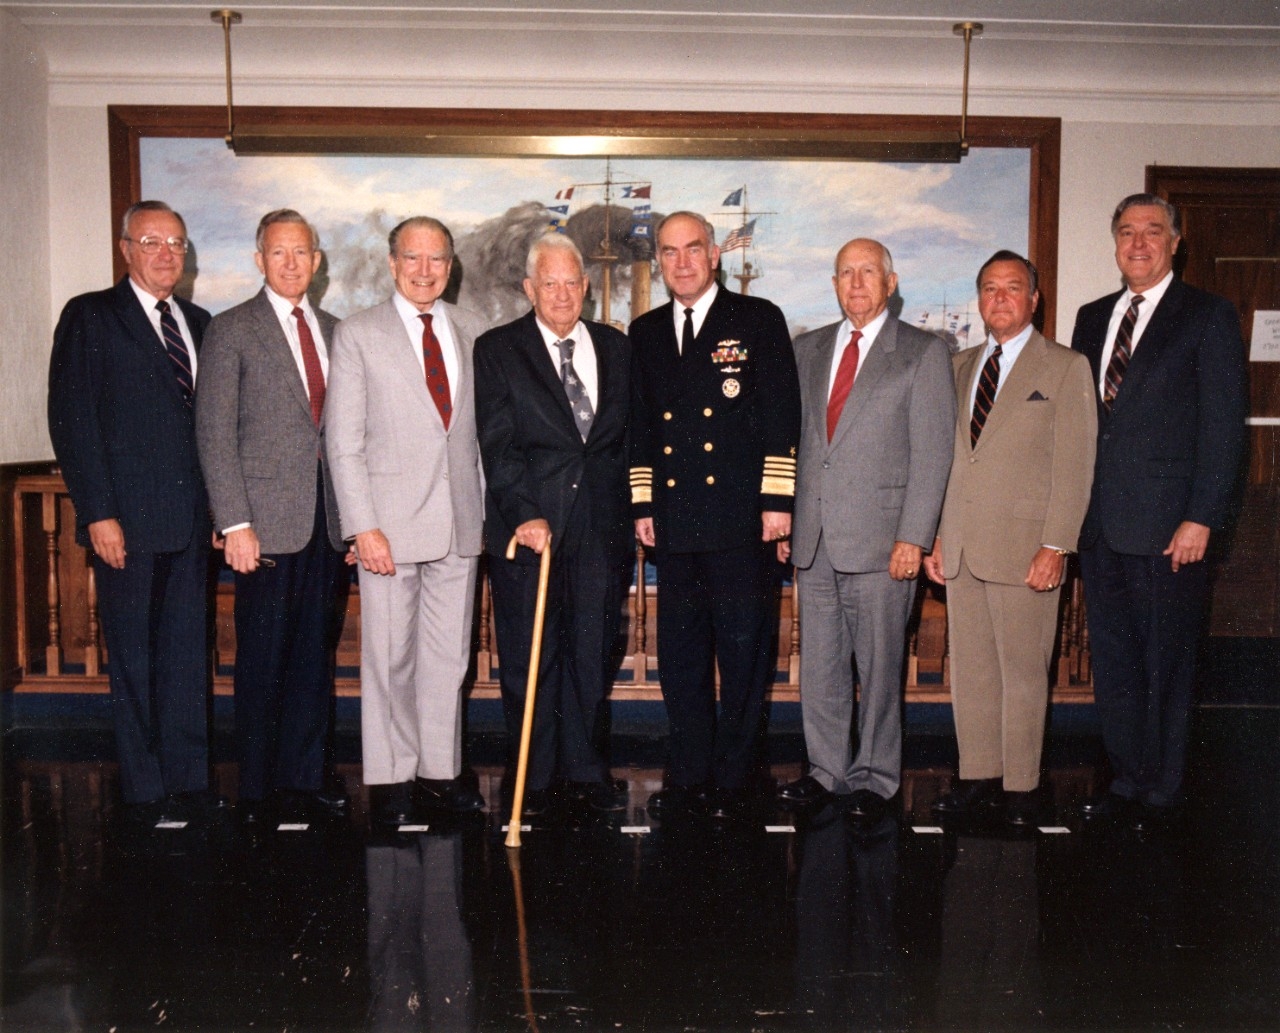 The current CNO, Admiral Frank Kelso, with former CNOs at the Pentagon, 19 October 1990. Those present are (from left to right): Admiral Carlisle A.H. Trost, CNO in 1986-1990; Admiral Thomas Hayward, CNO in 1978-1982; Admiral Elmo Zumwalt, CNO in...